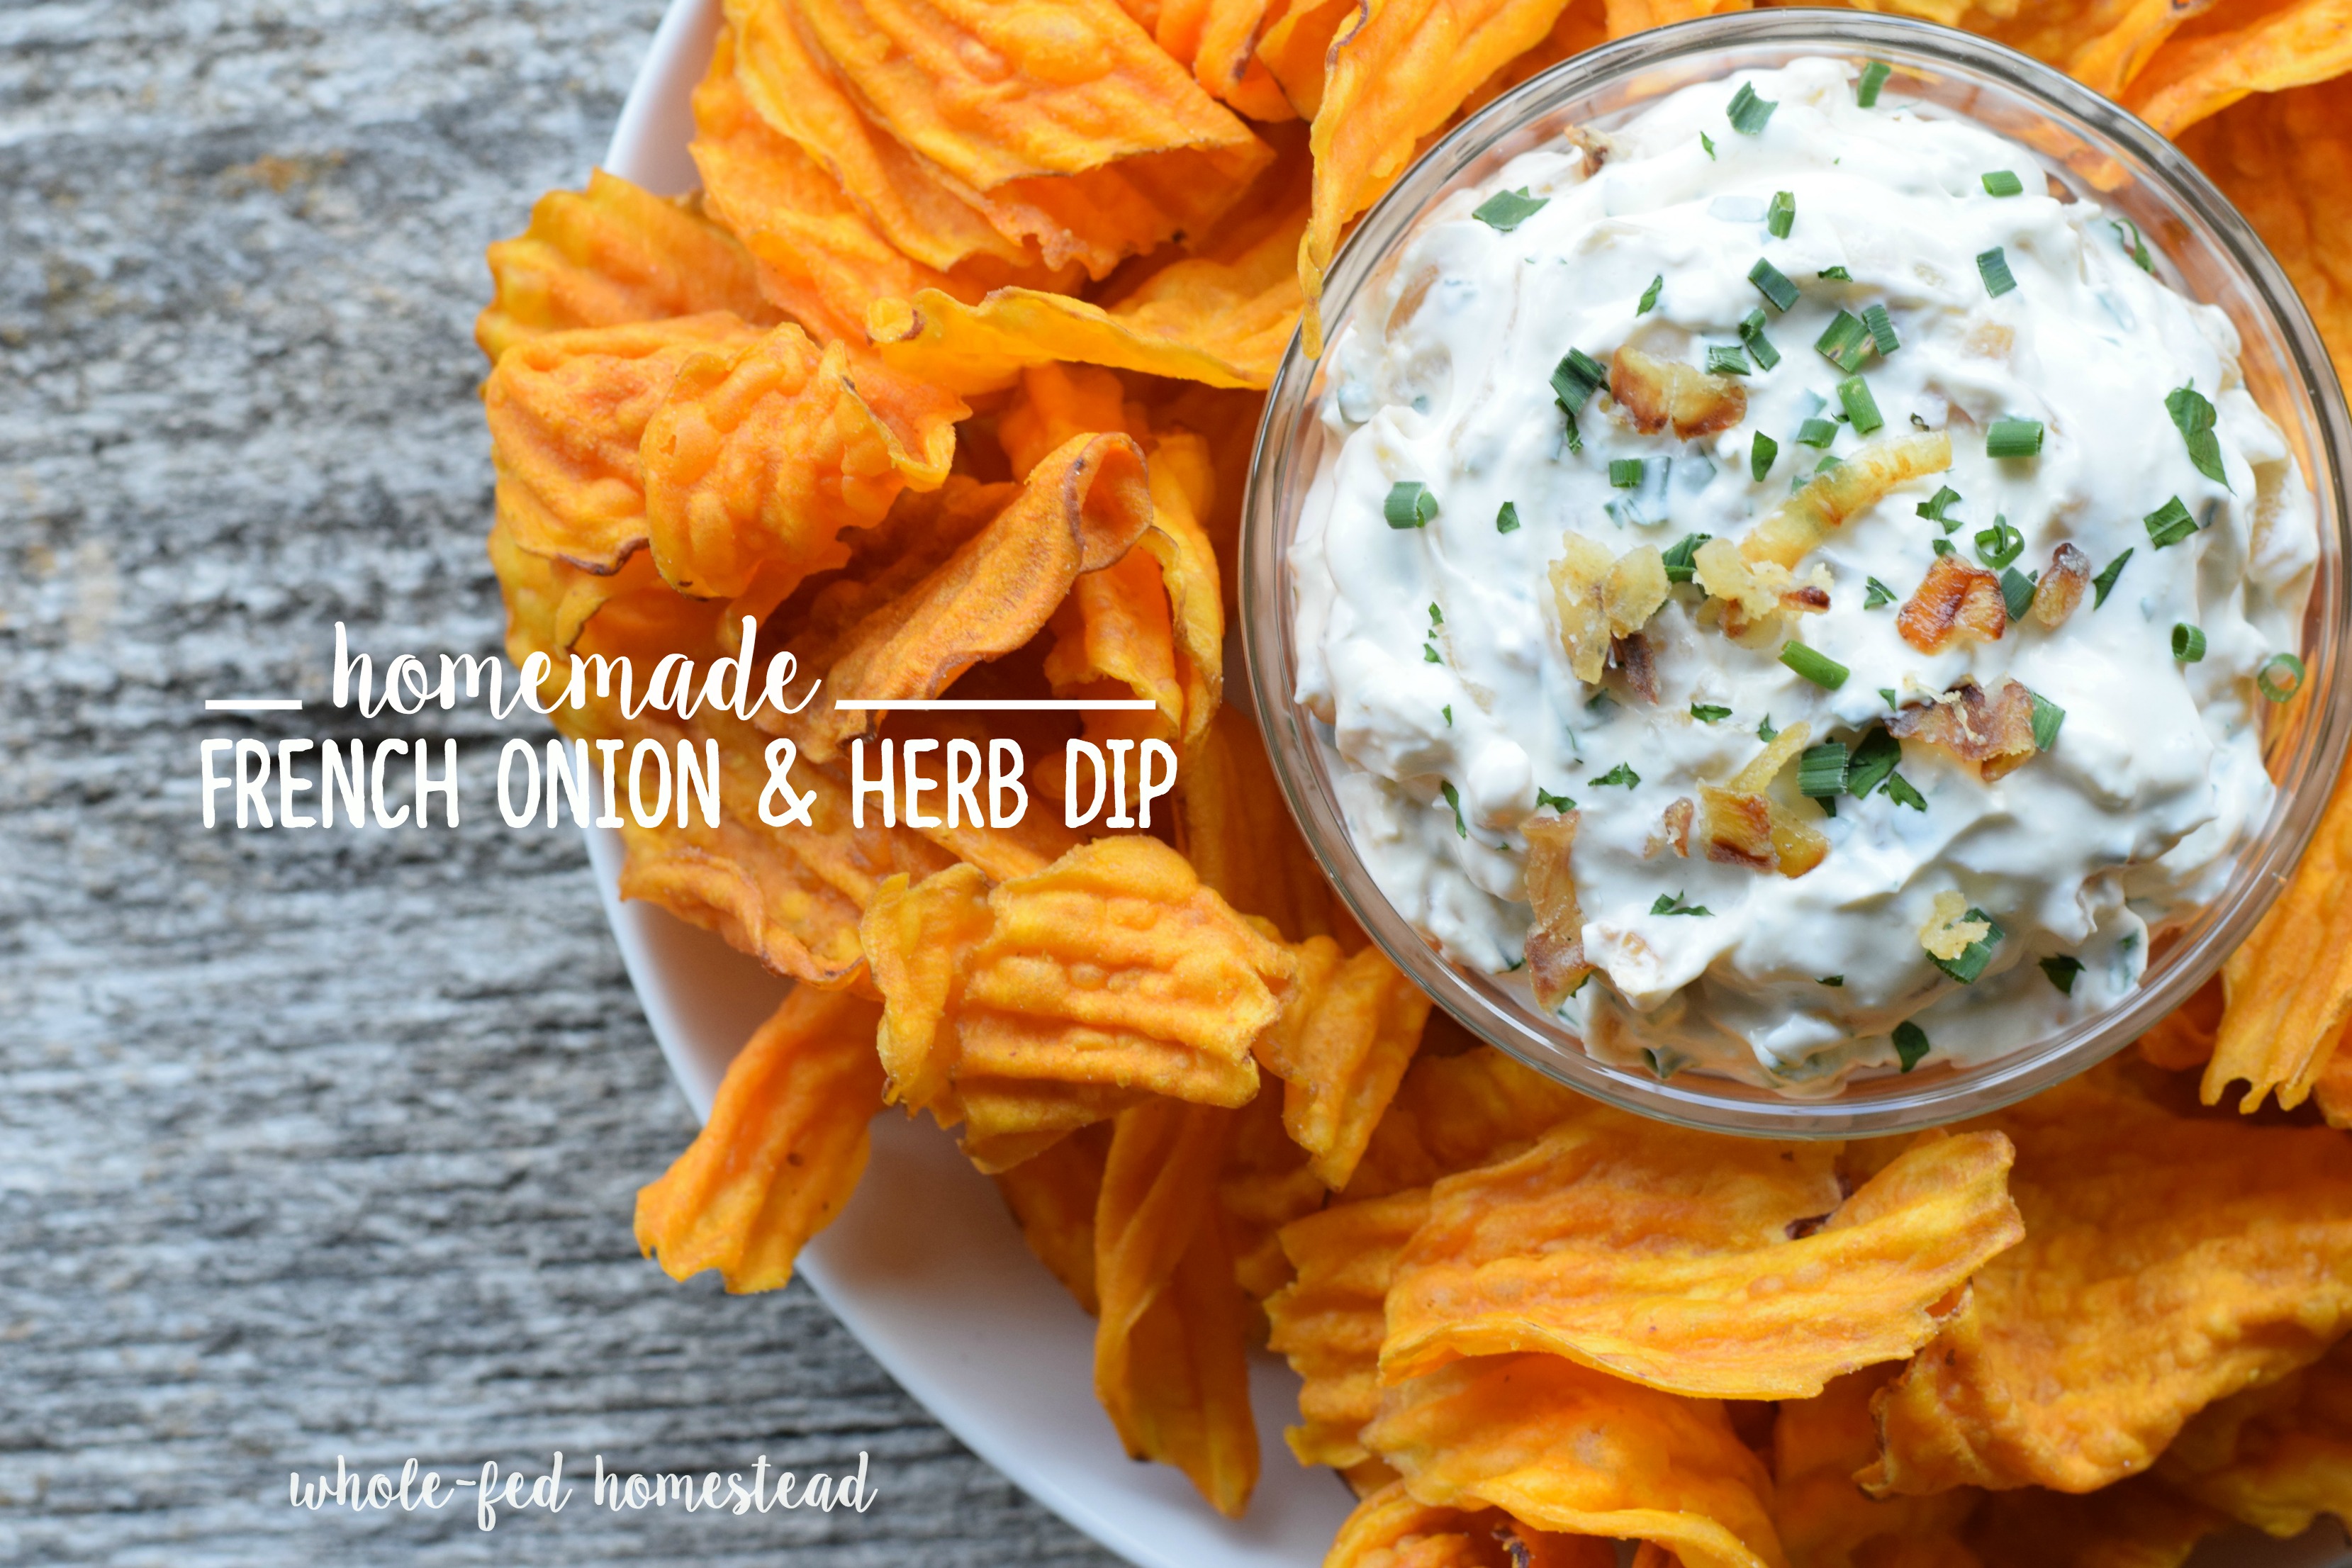 Homemade French Onion & Herb Dip Recipe